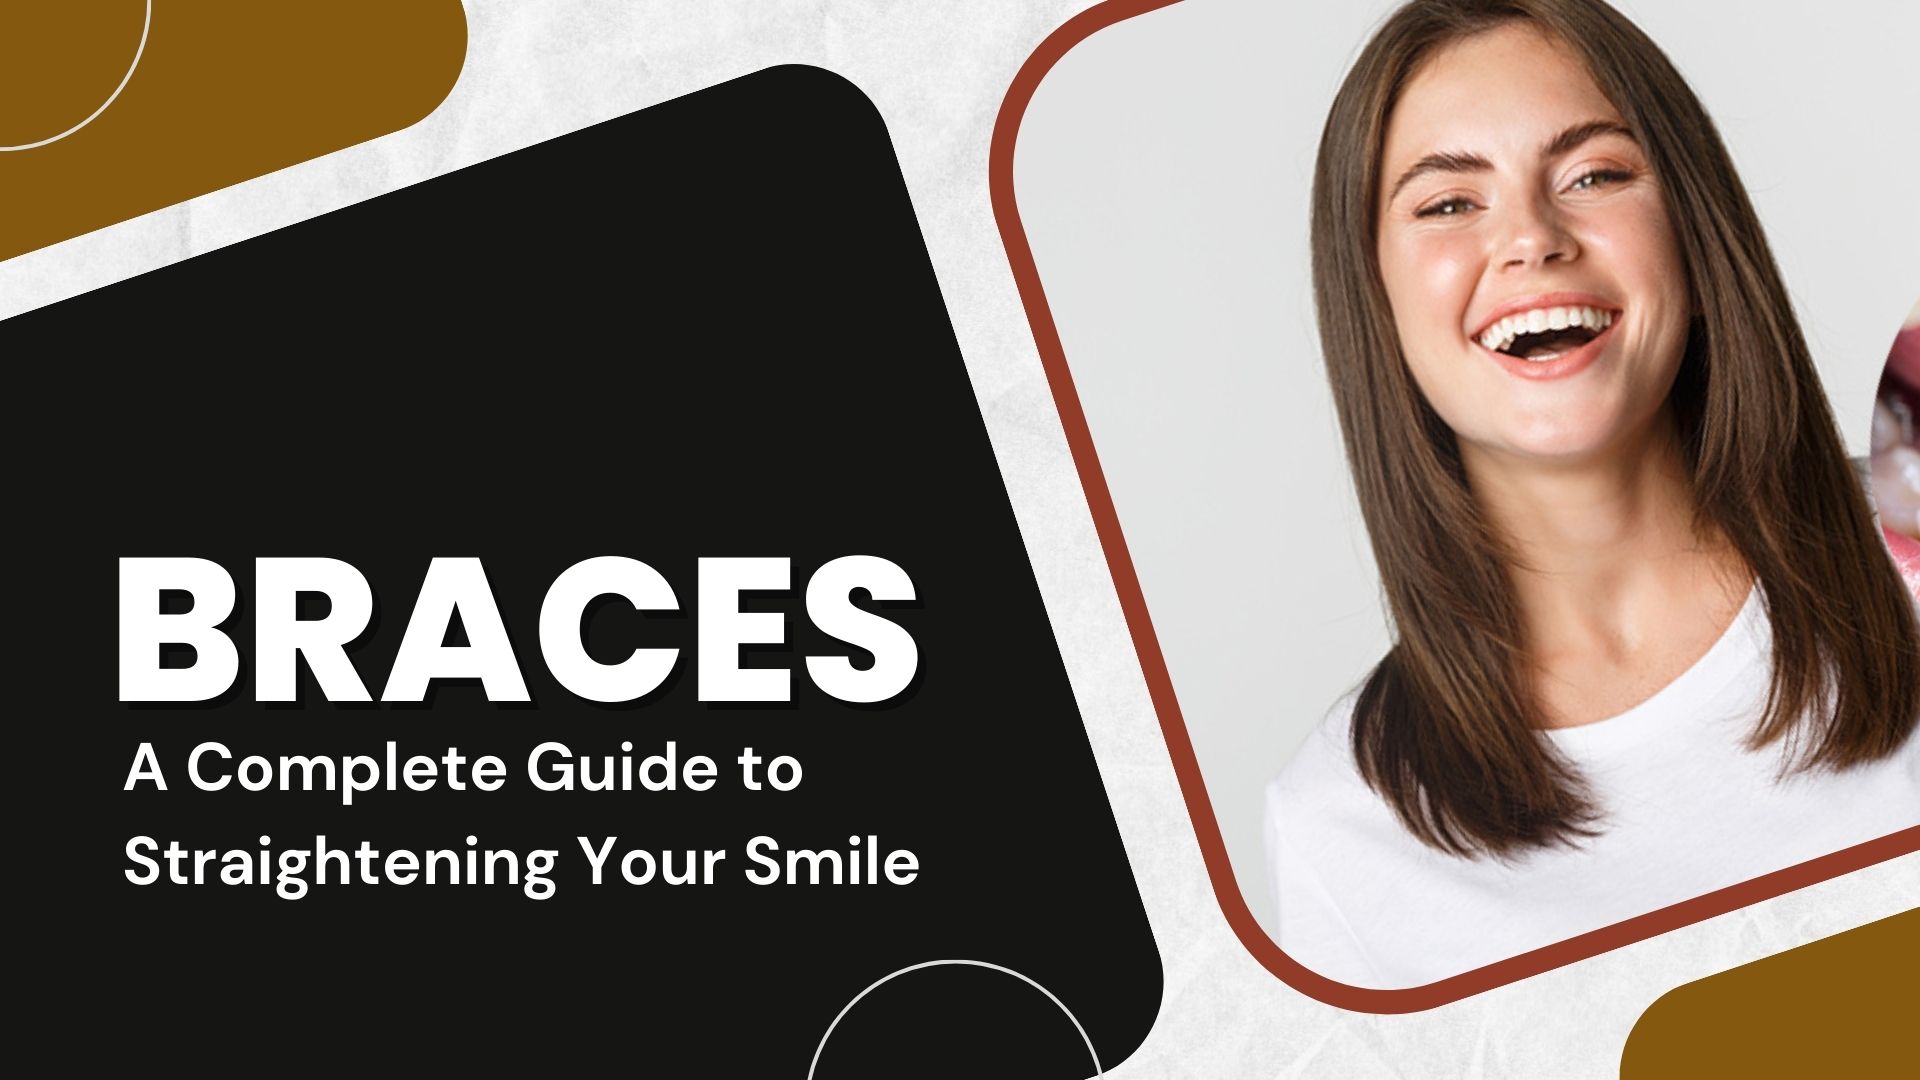 Braces: A Complete Guide to Straightening Your Smile